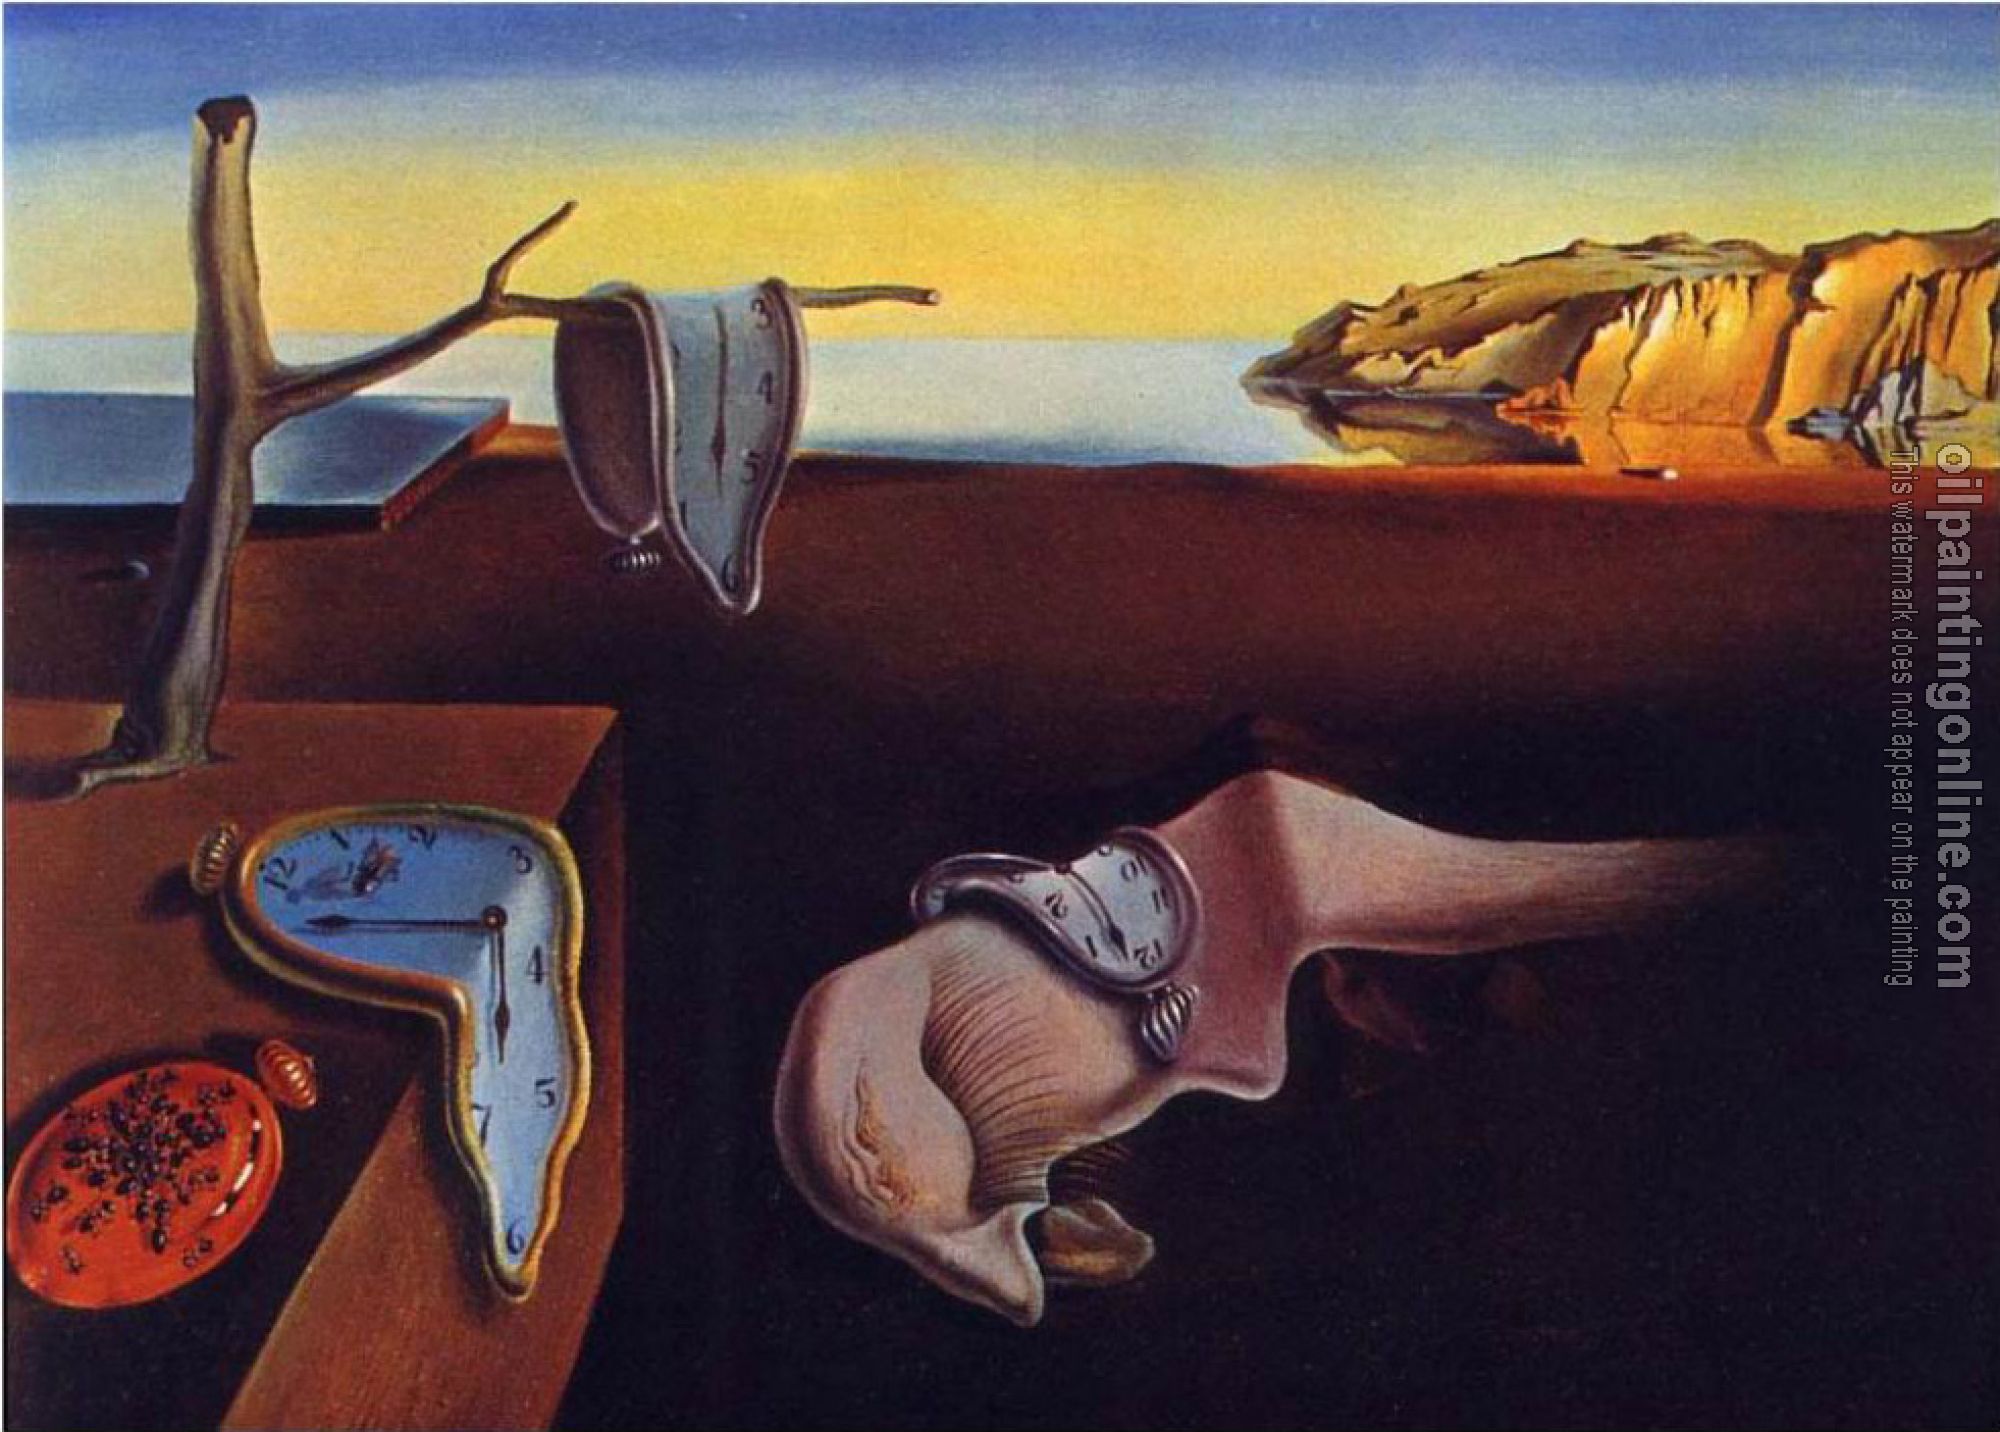 Dali, Salvador - The Persistence of Memory(Soft Watches)